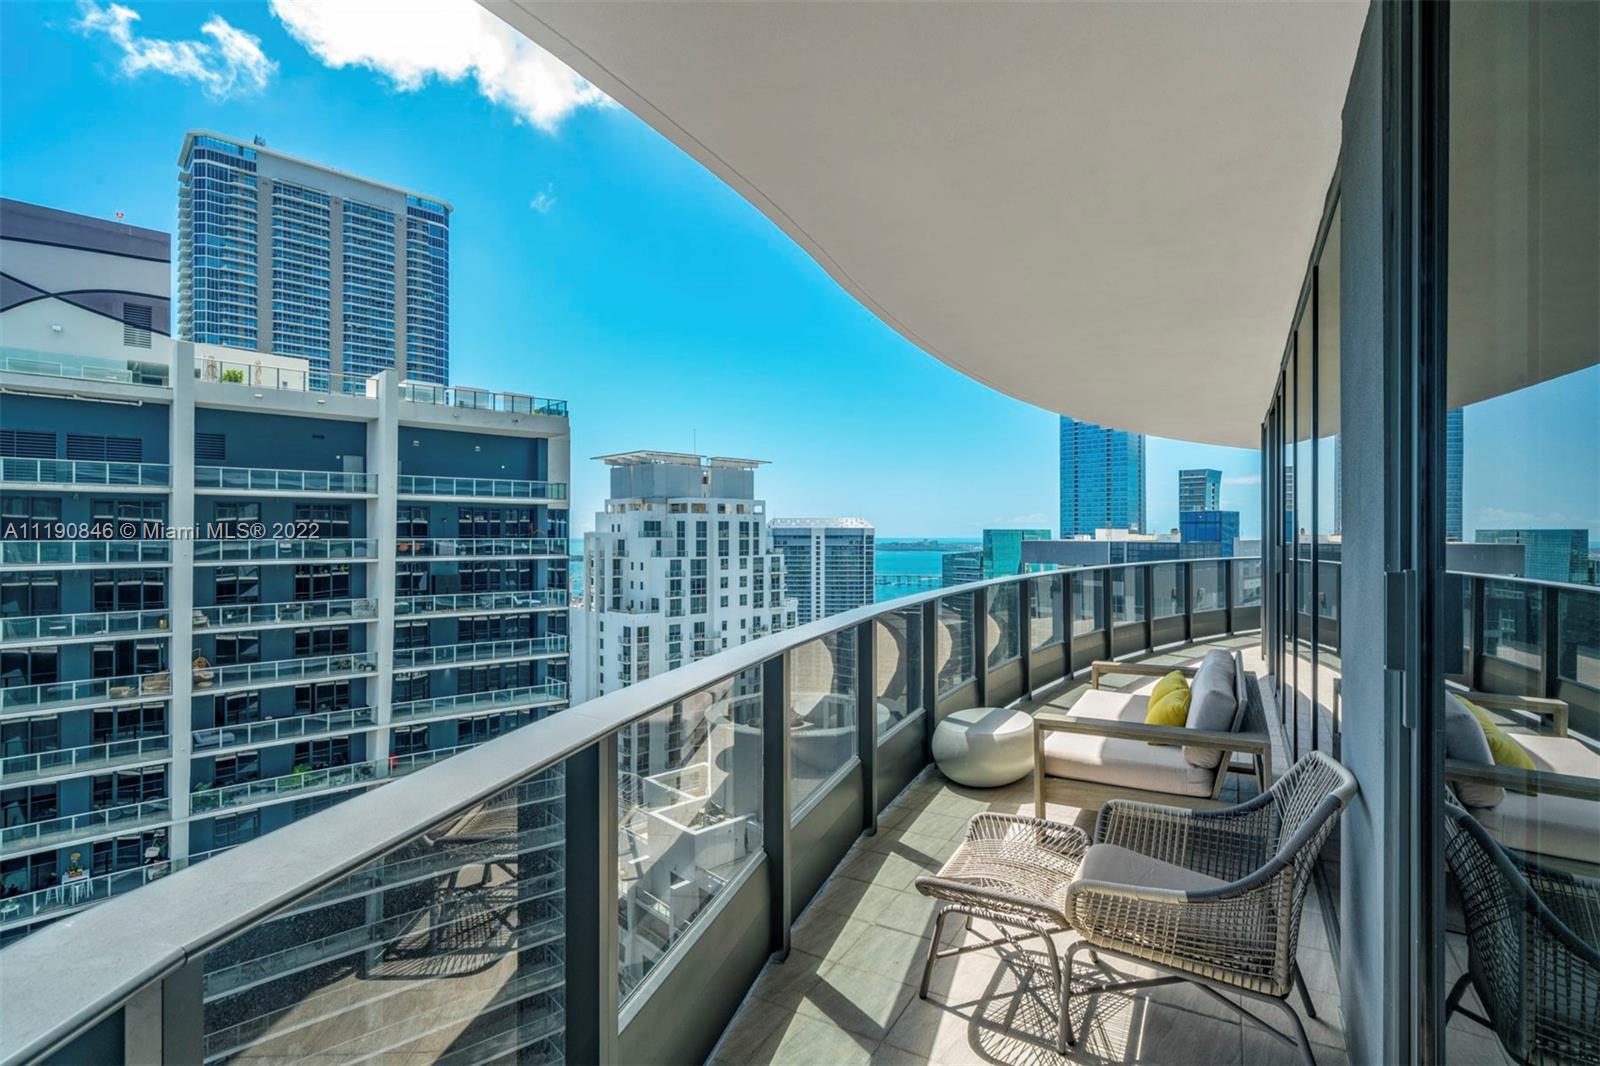 Located in the heart of Brickell, this contemporary and luxurious 2-bedroom, 2.5-bath condo is a must-see! Inside the open layout, walls of glass frame water views and fill every corner with sunlight. Custom wallpaper and upgraded light fixtures lend a sophisticated feel to the main gathering areas. Kitchen features include high-end Miele appliances, Snaidero cabinets, a peninsula with seating, and a large pantry with built-in storage. Electric blinds provide privacy when you retire to your bedrooms and custom closets offer plentiful storage. Marble is on display in the primary bedroom with a walk-in rainfall shower. Building has premium amenities with two pool decks, 64th floor gym and spa.